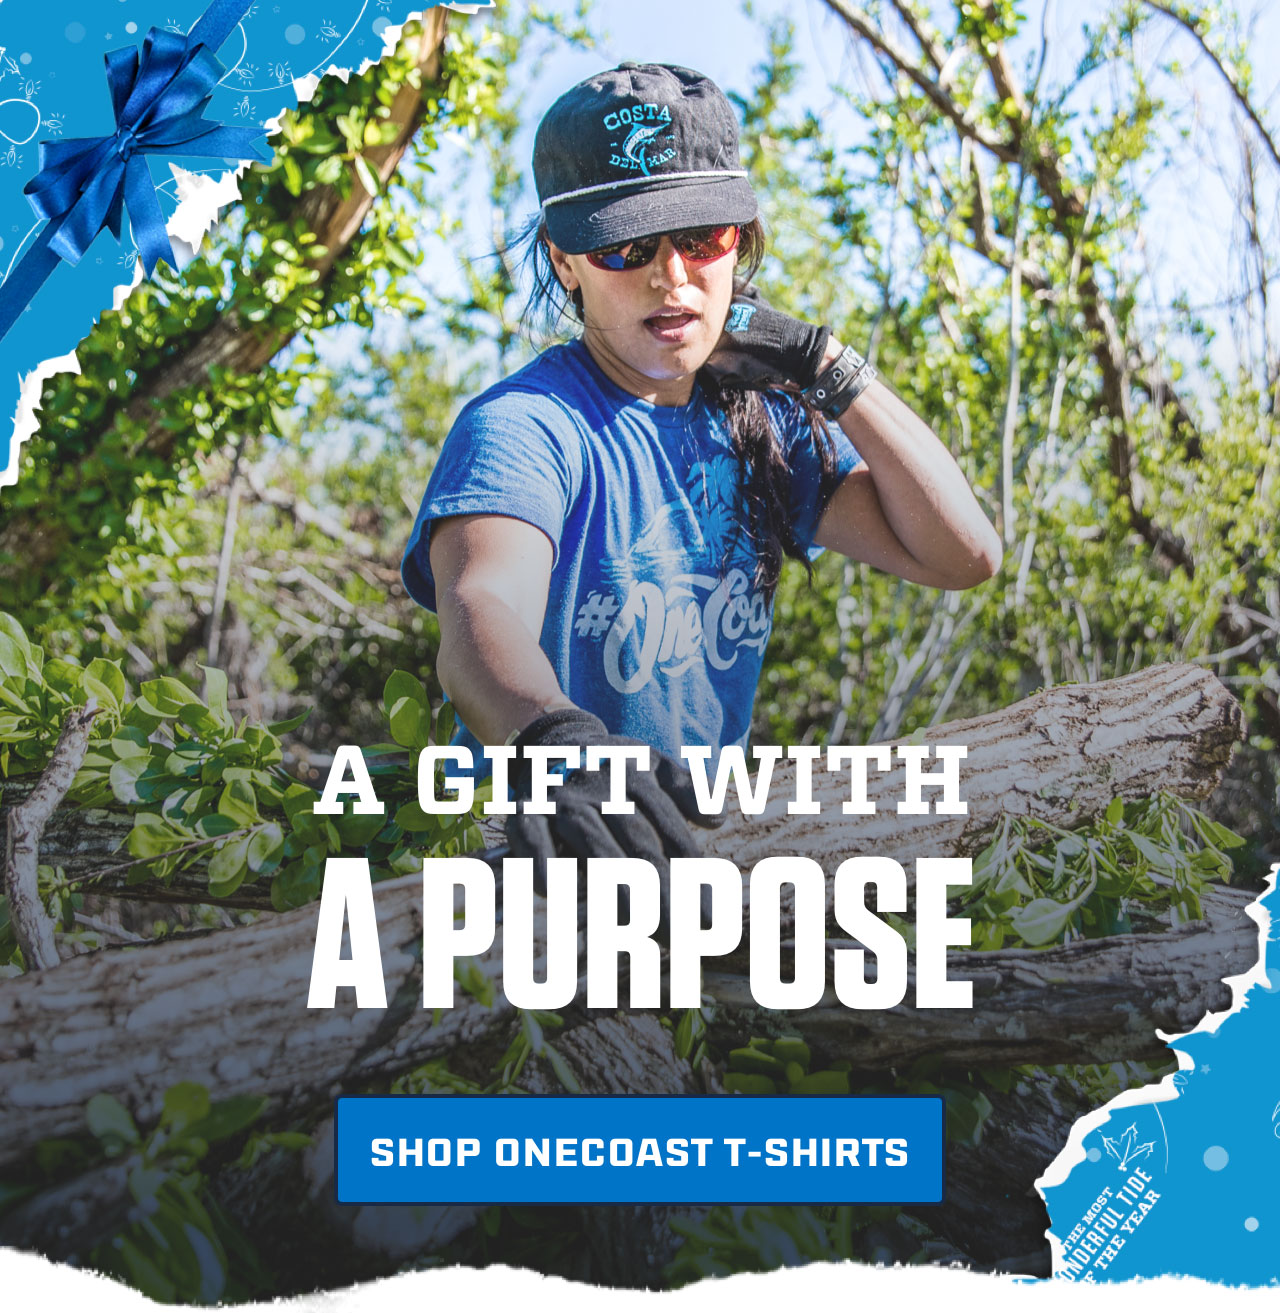 

A GIFT WITH A PURPOSE

[ SHOP ONECOAST T-SHIRTS ]

									